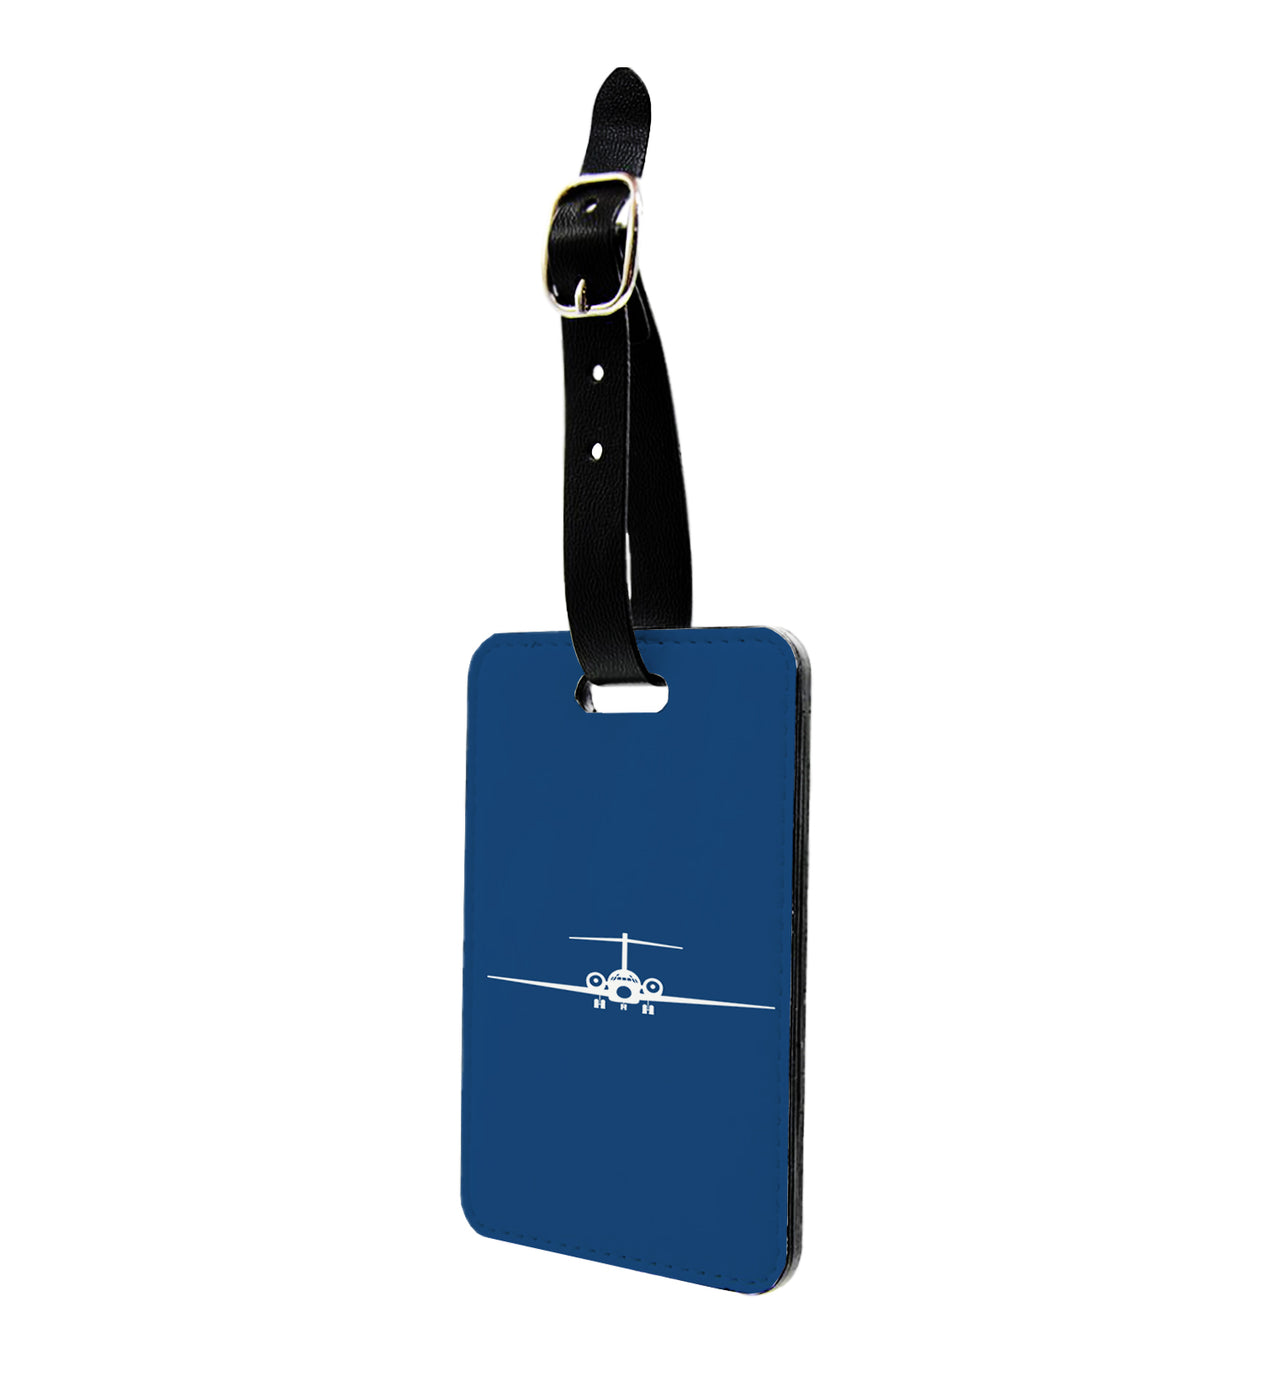 Boeing 717 Silhouette Designed Luggage Tag